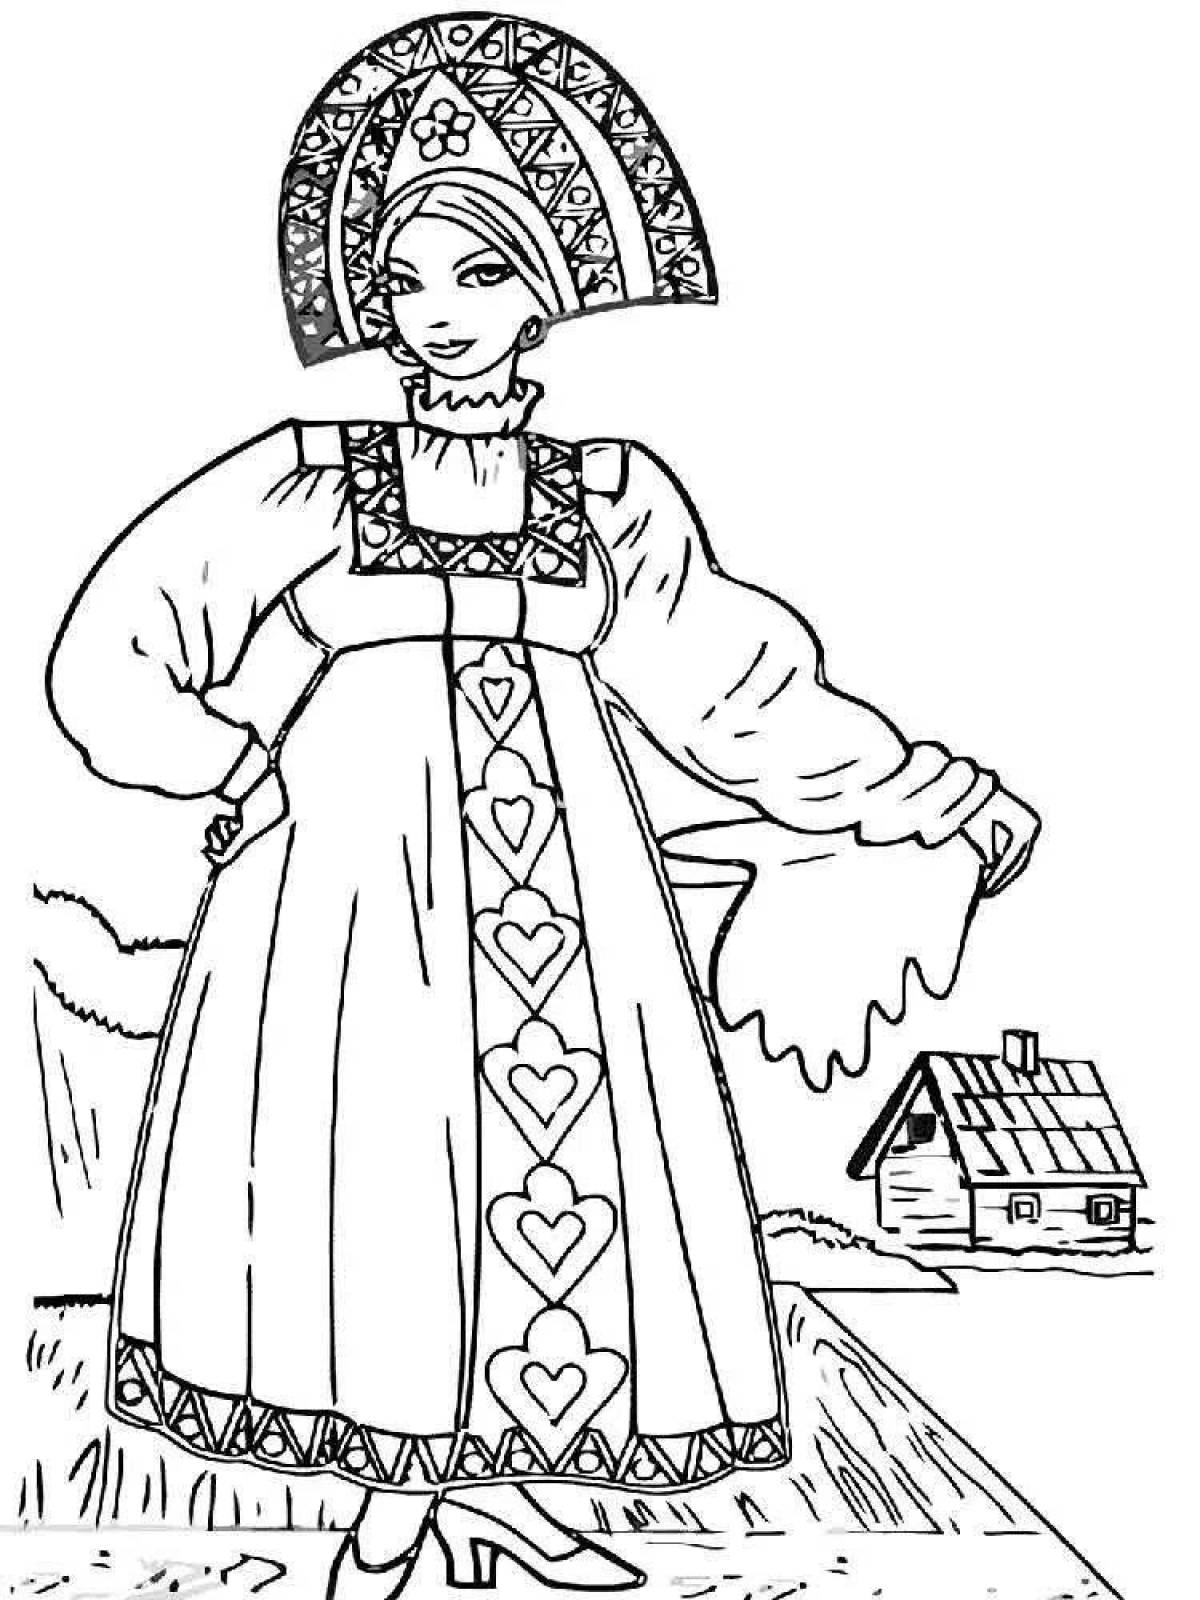 Coloring page luxury national costume russia